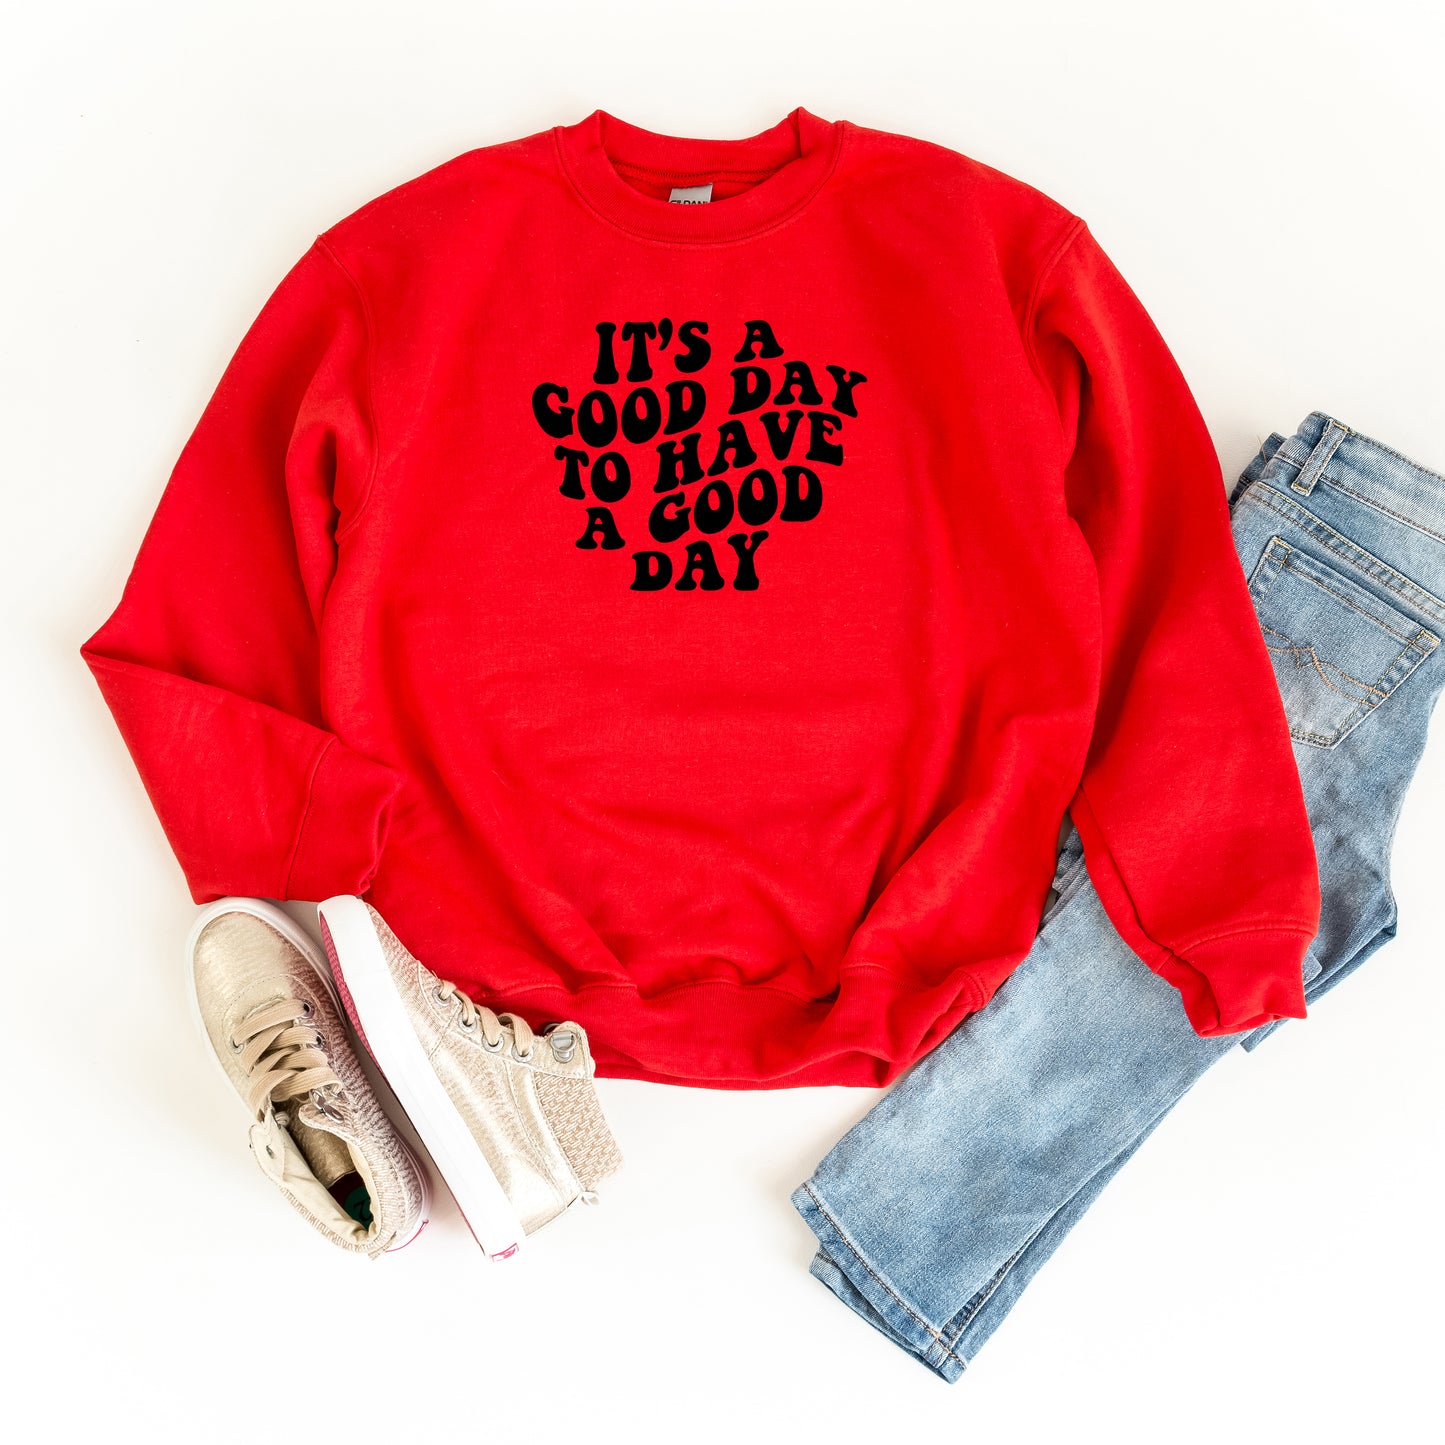 It's A Good Day To Have A Good Day | Youth Sweatshirt